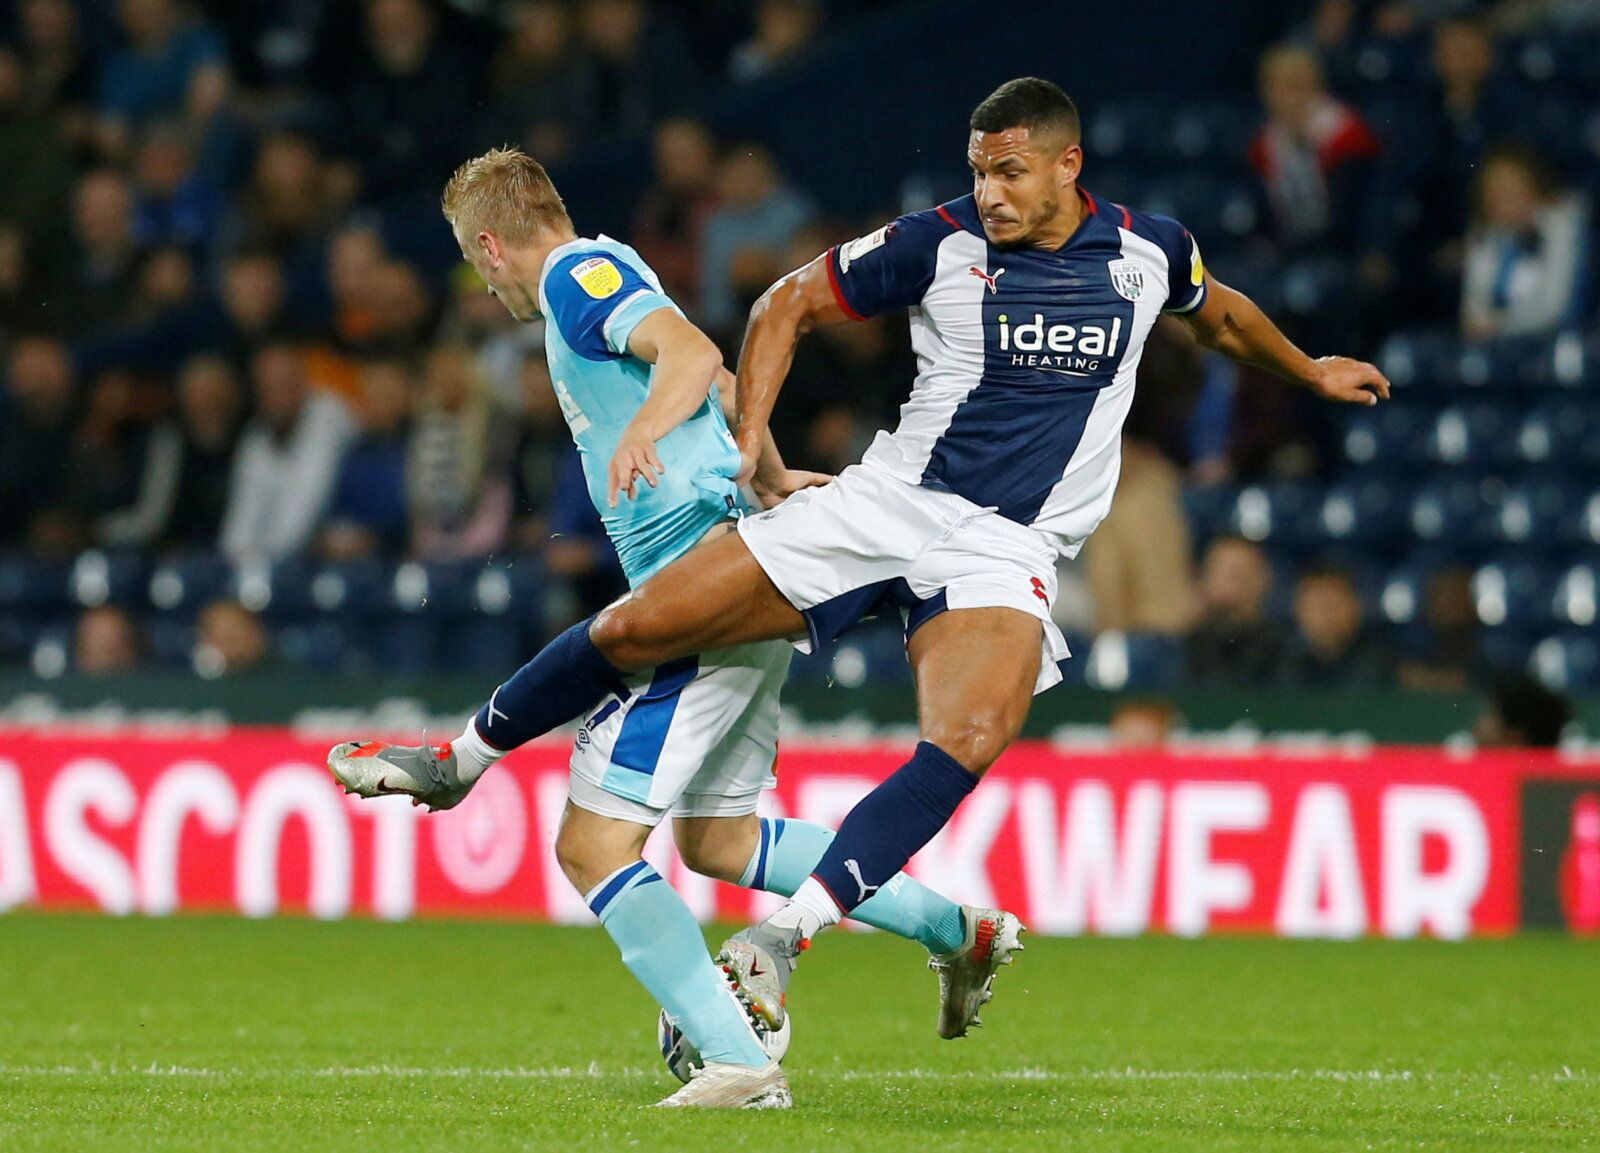 Soccer Football - Championship - West Bromwich Albion v Derby County - The Hawthorns, West Bromwich, Britain - September 14, 2021 Derby County's Louie Sibley in action with West Bromwich Albion's Jake Livermore  Action Images/Ed Sykes